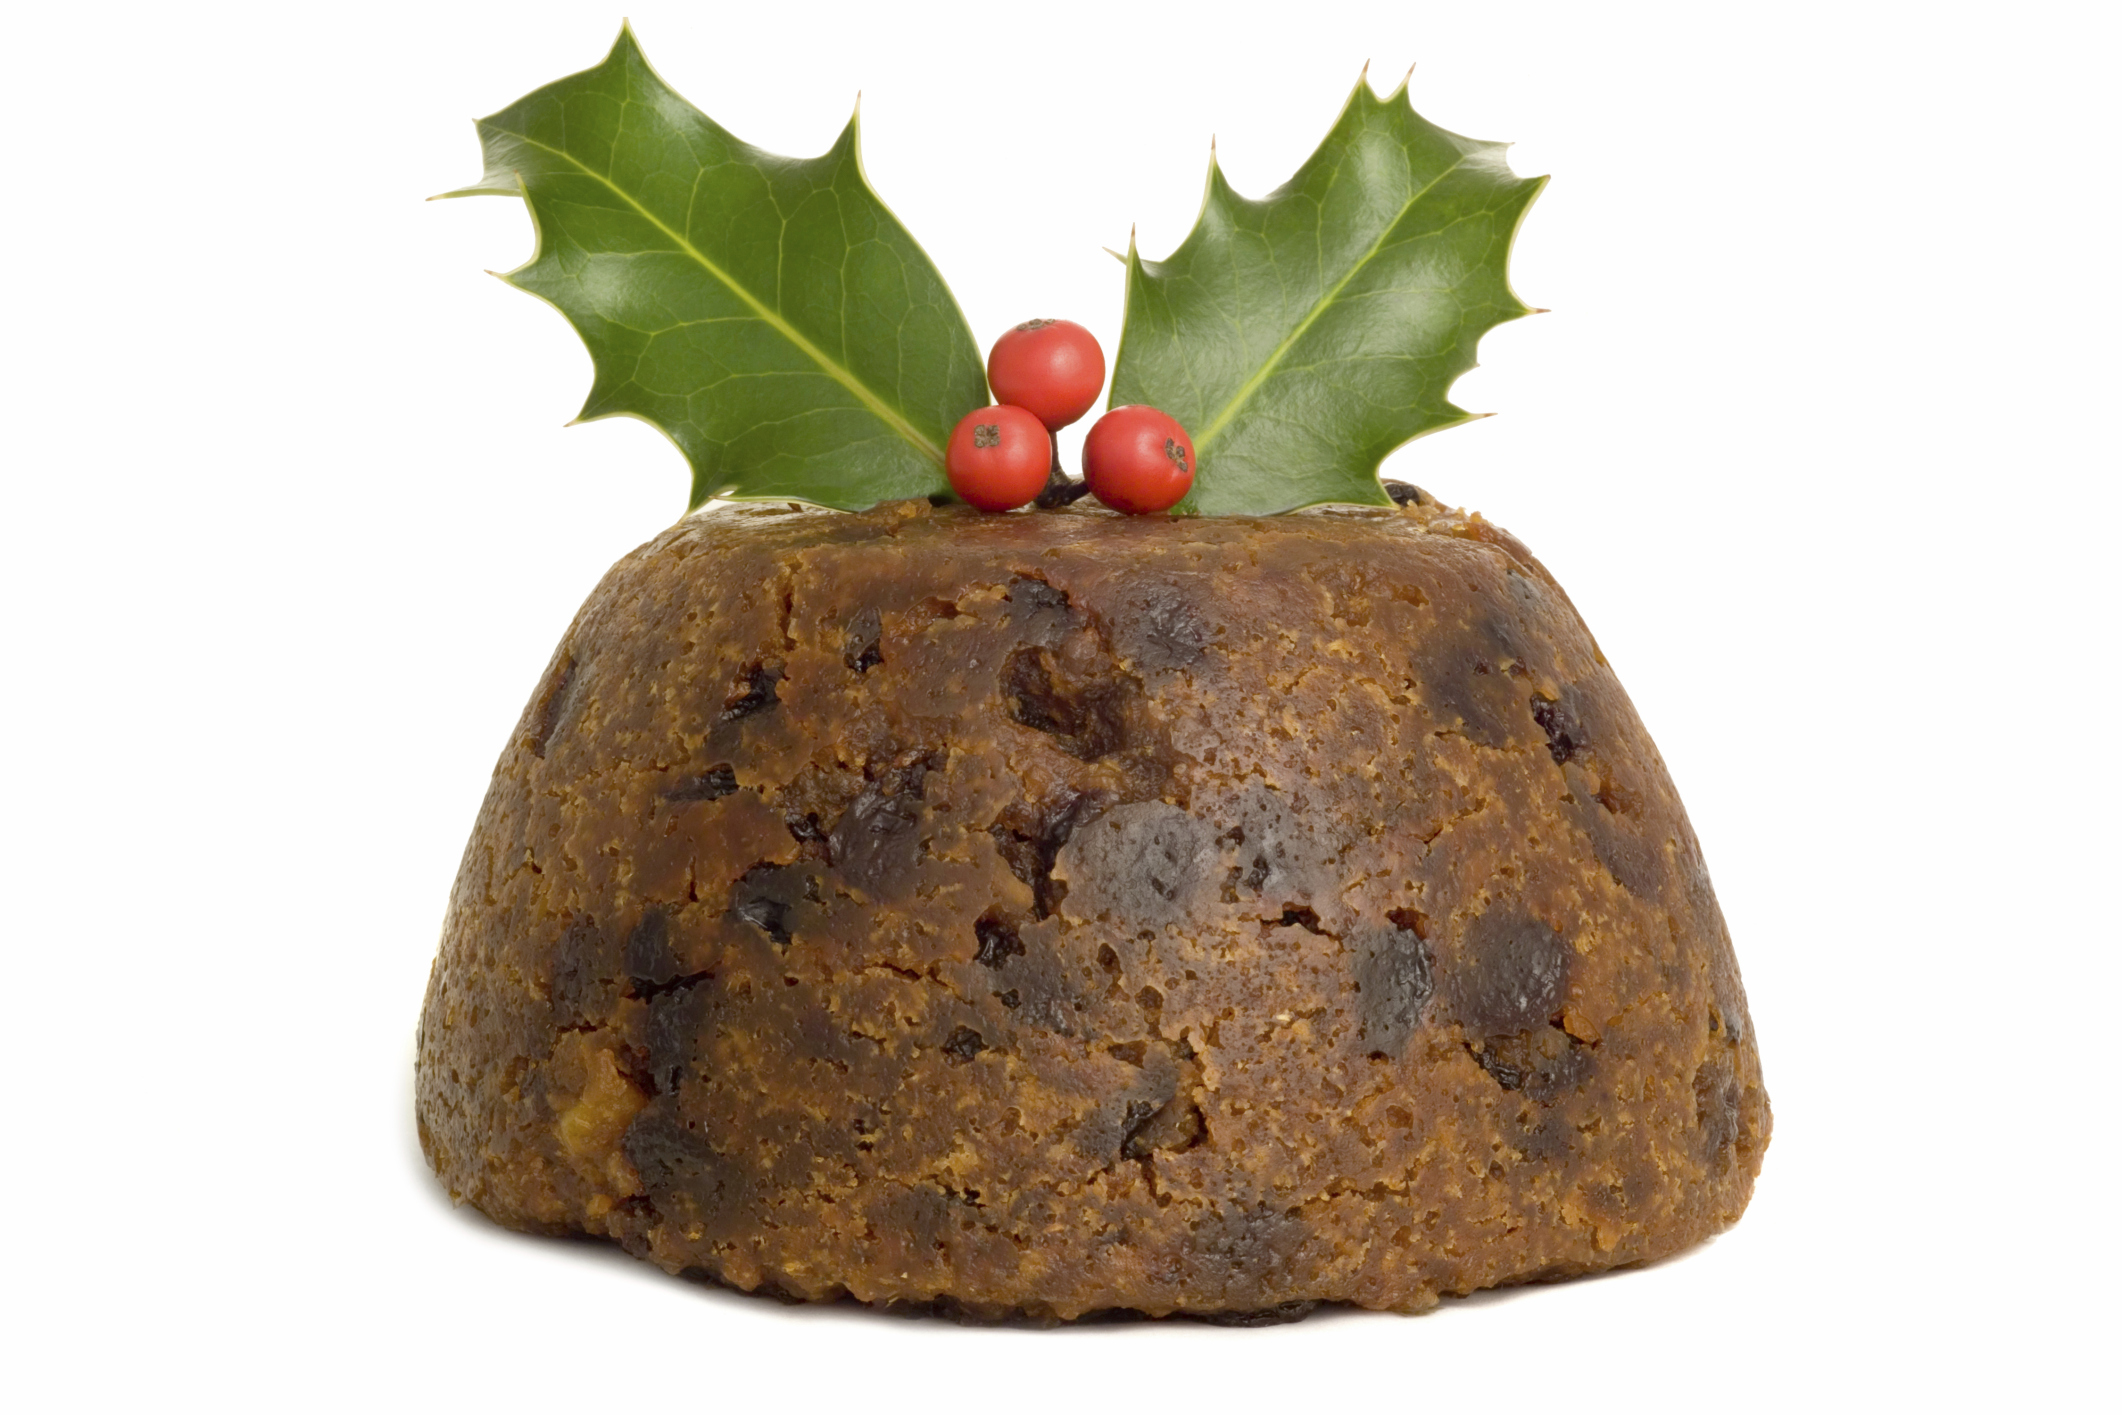 Slow Cooker Christmas Pudding - Sew White